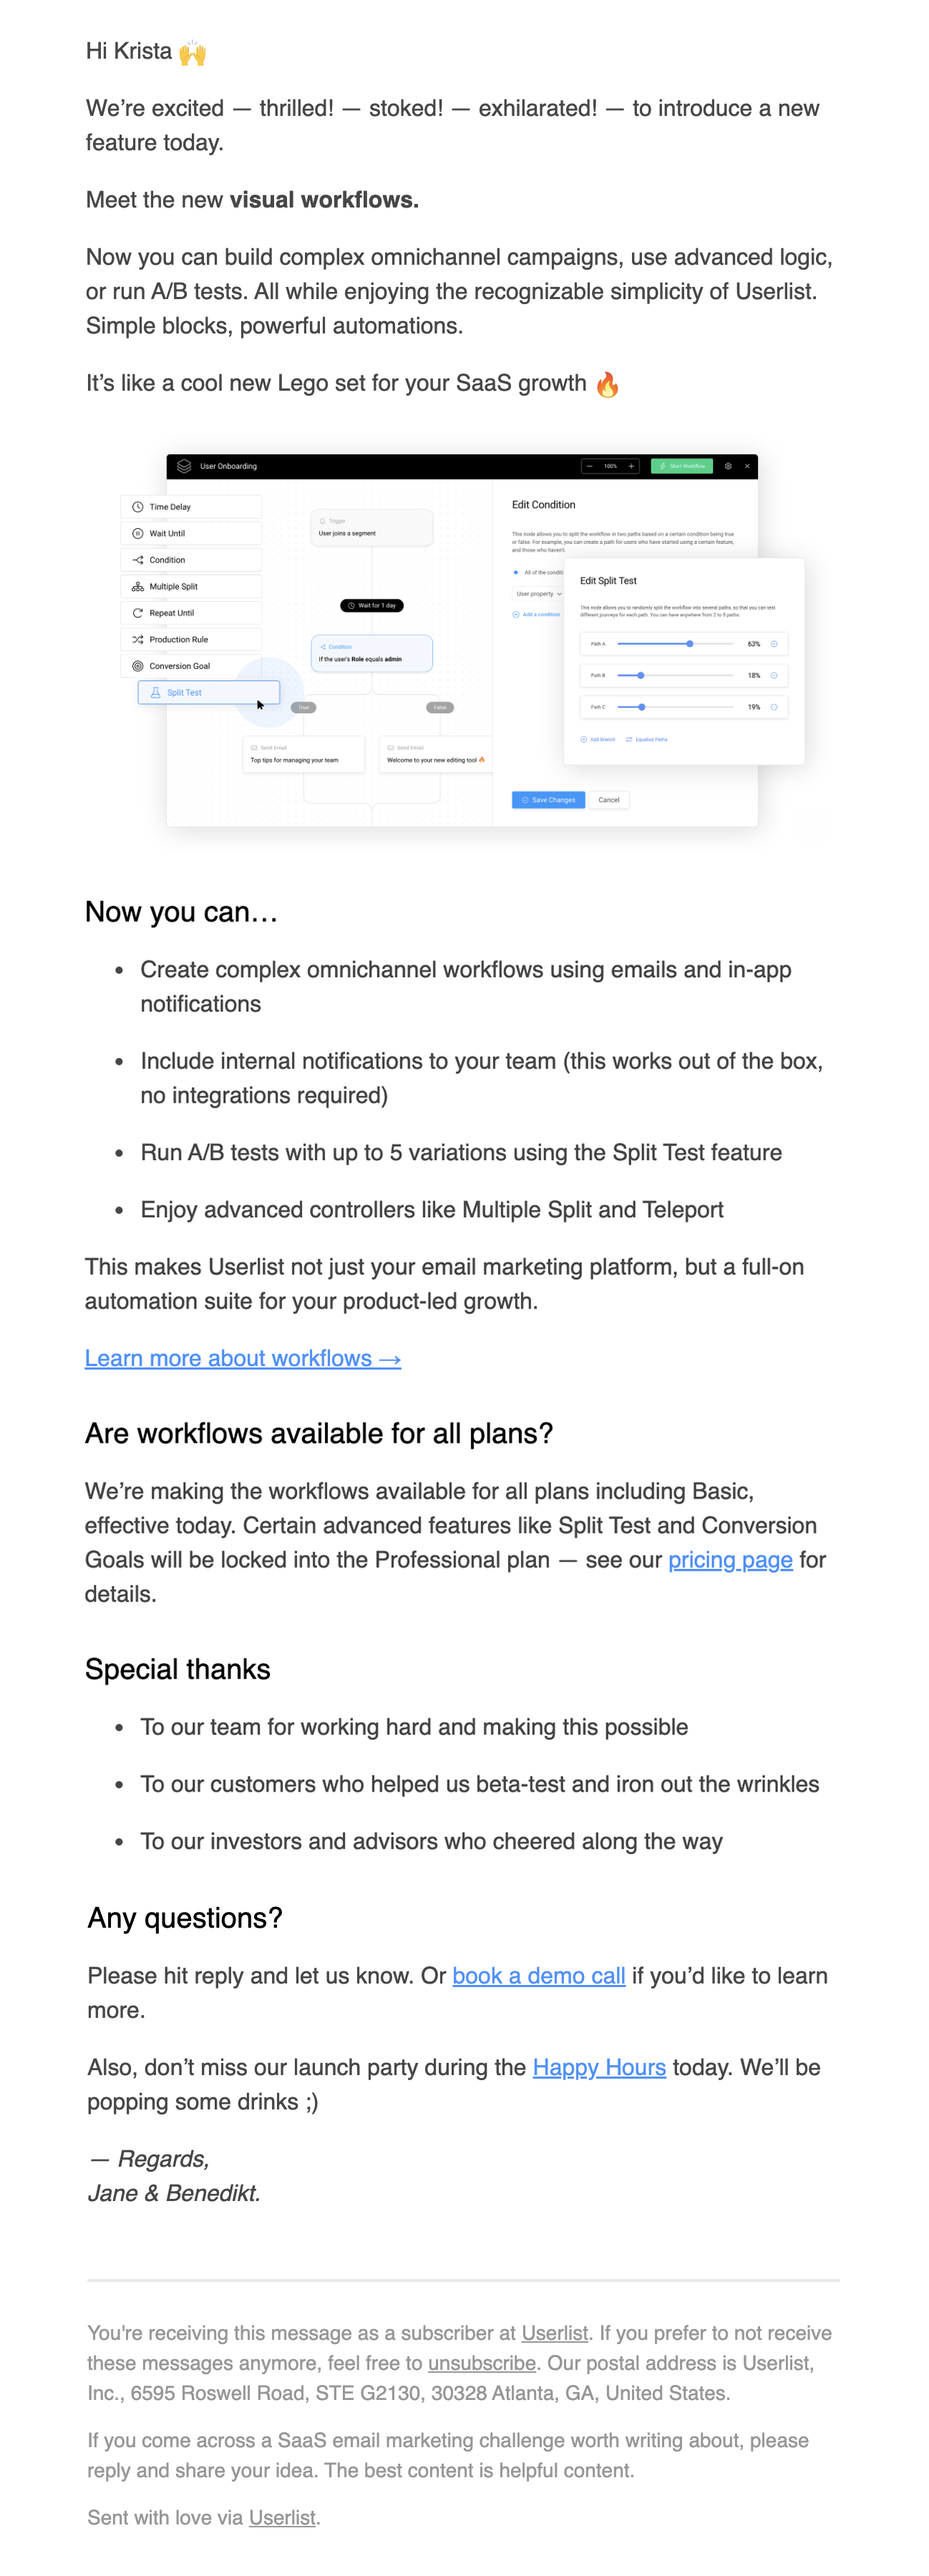 New Feature Announcement Emails: Screenshot of Userlist's email talking about their latest feature